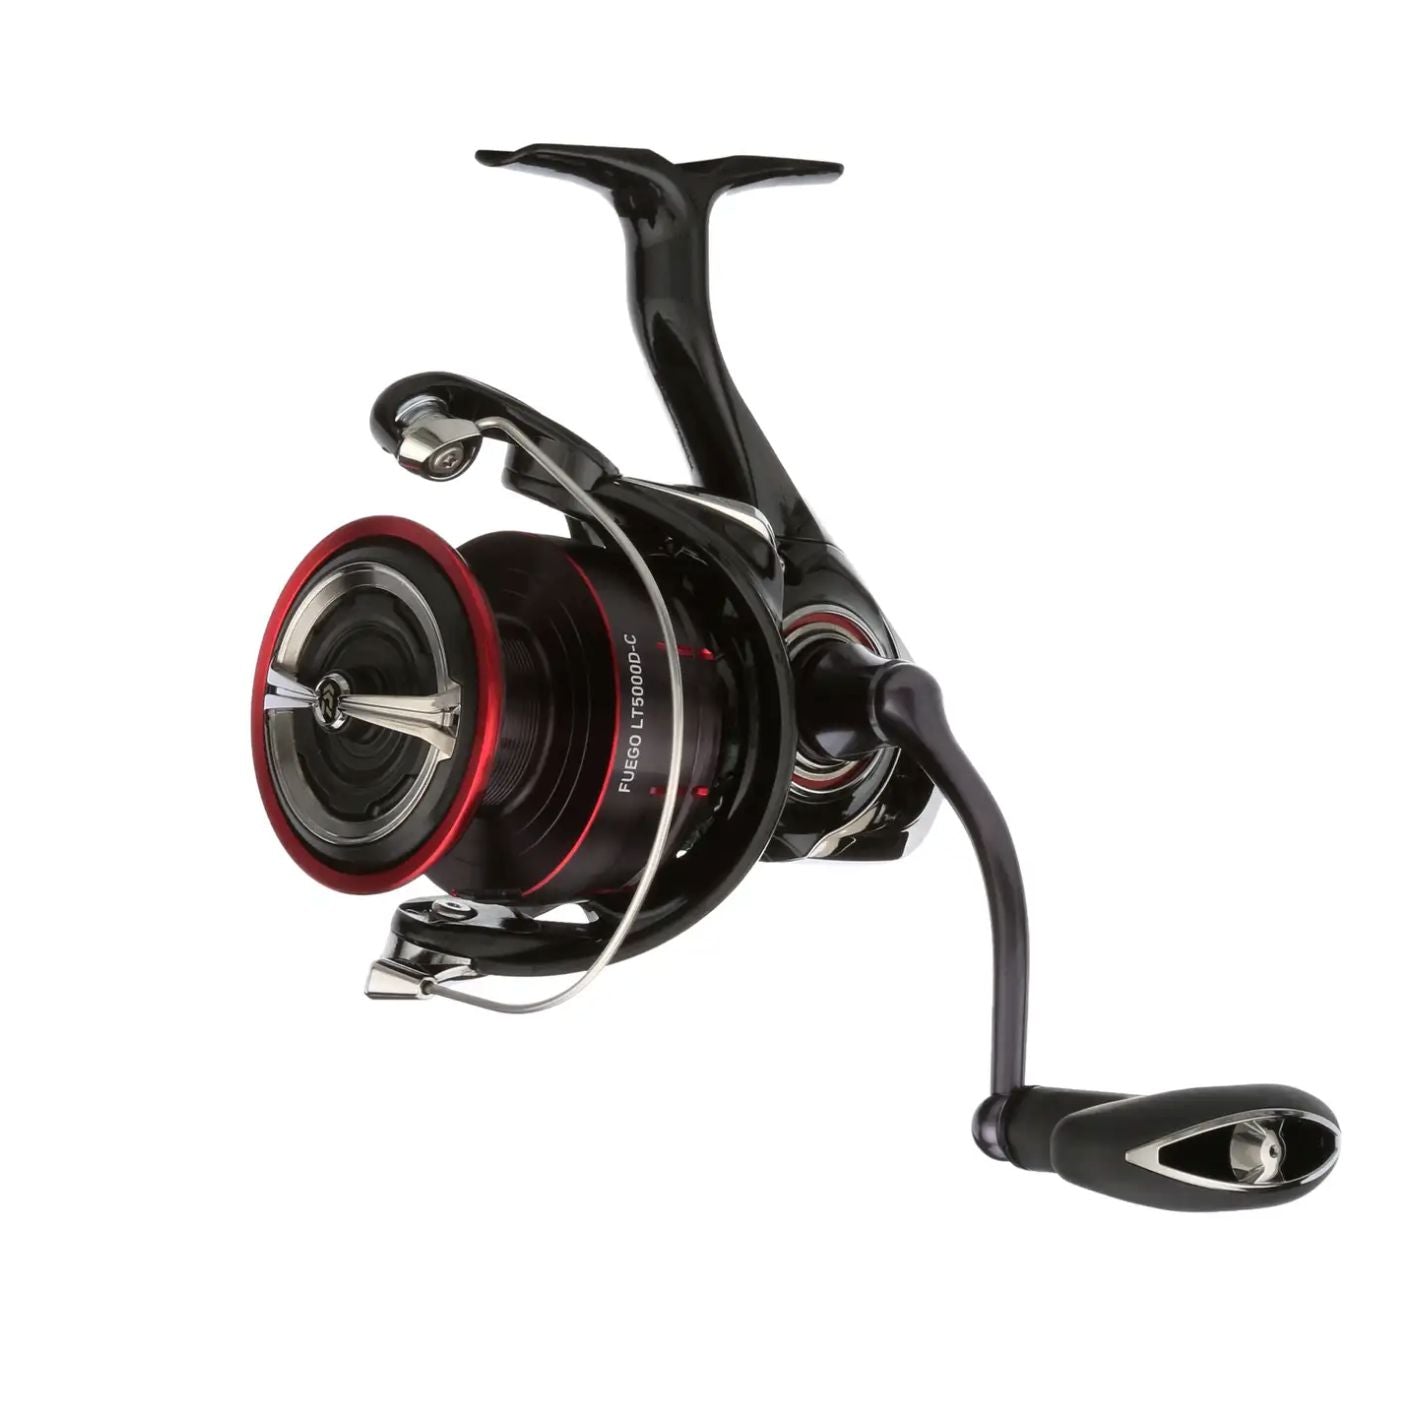 Daiwa Fuego LT 5.3:1 Left/Right Hand Spinning Fishing Reel - FGLT2500D :  : Sports, Fitness & Outdoors